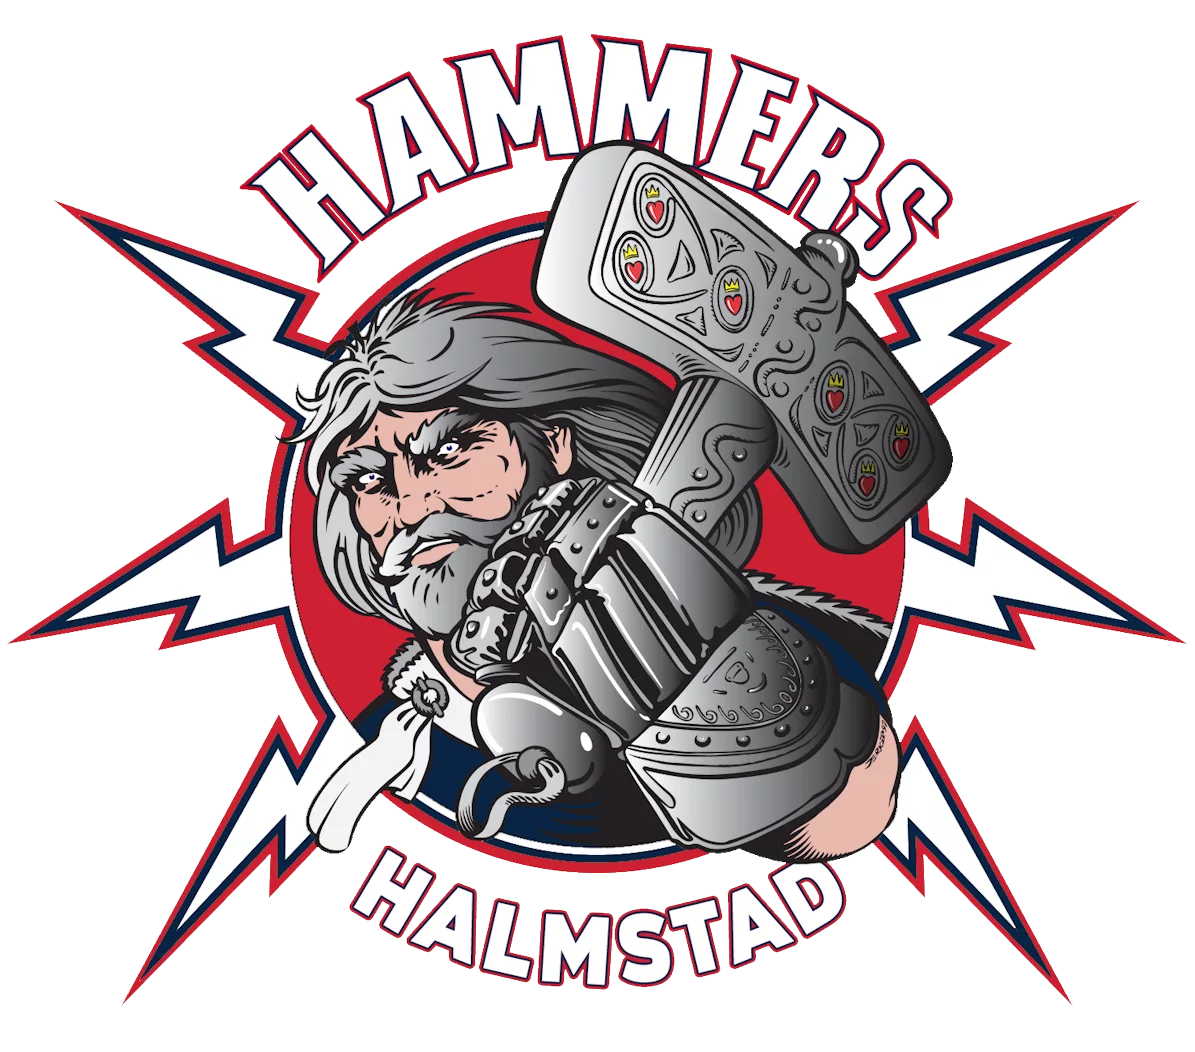 Hammers logo.png